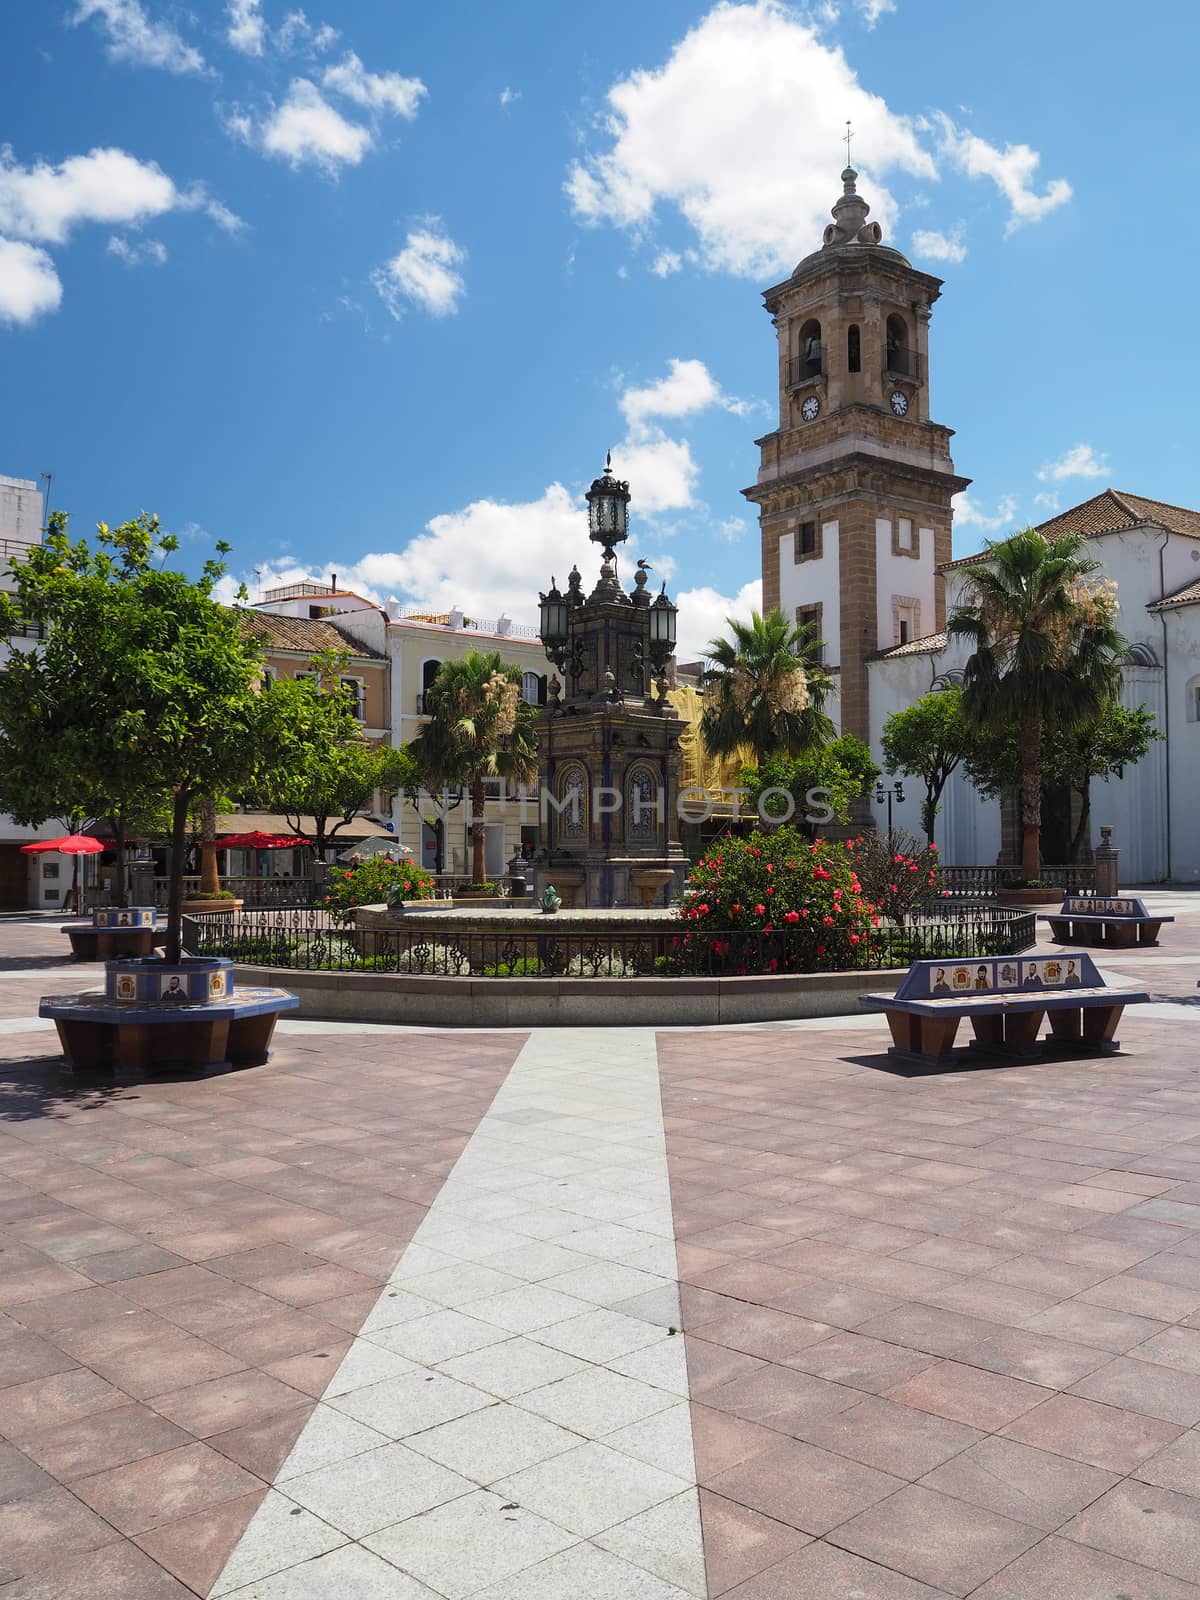 Looking across the Plaza Alta and the colorful tiled fountain and seating by PhilHarland